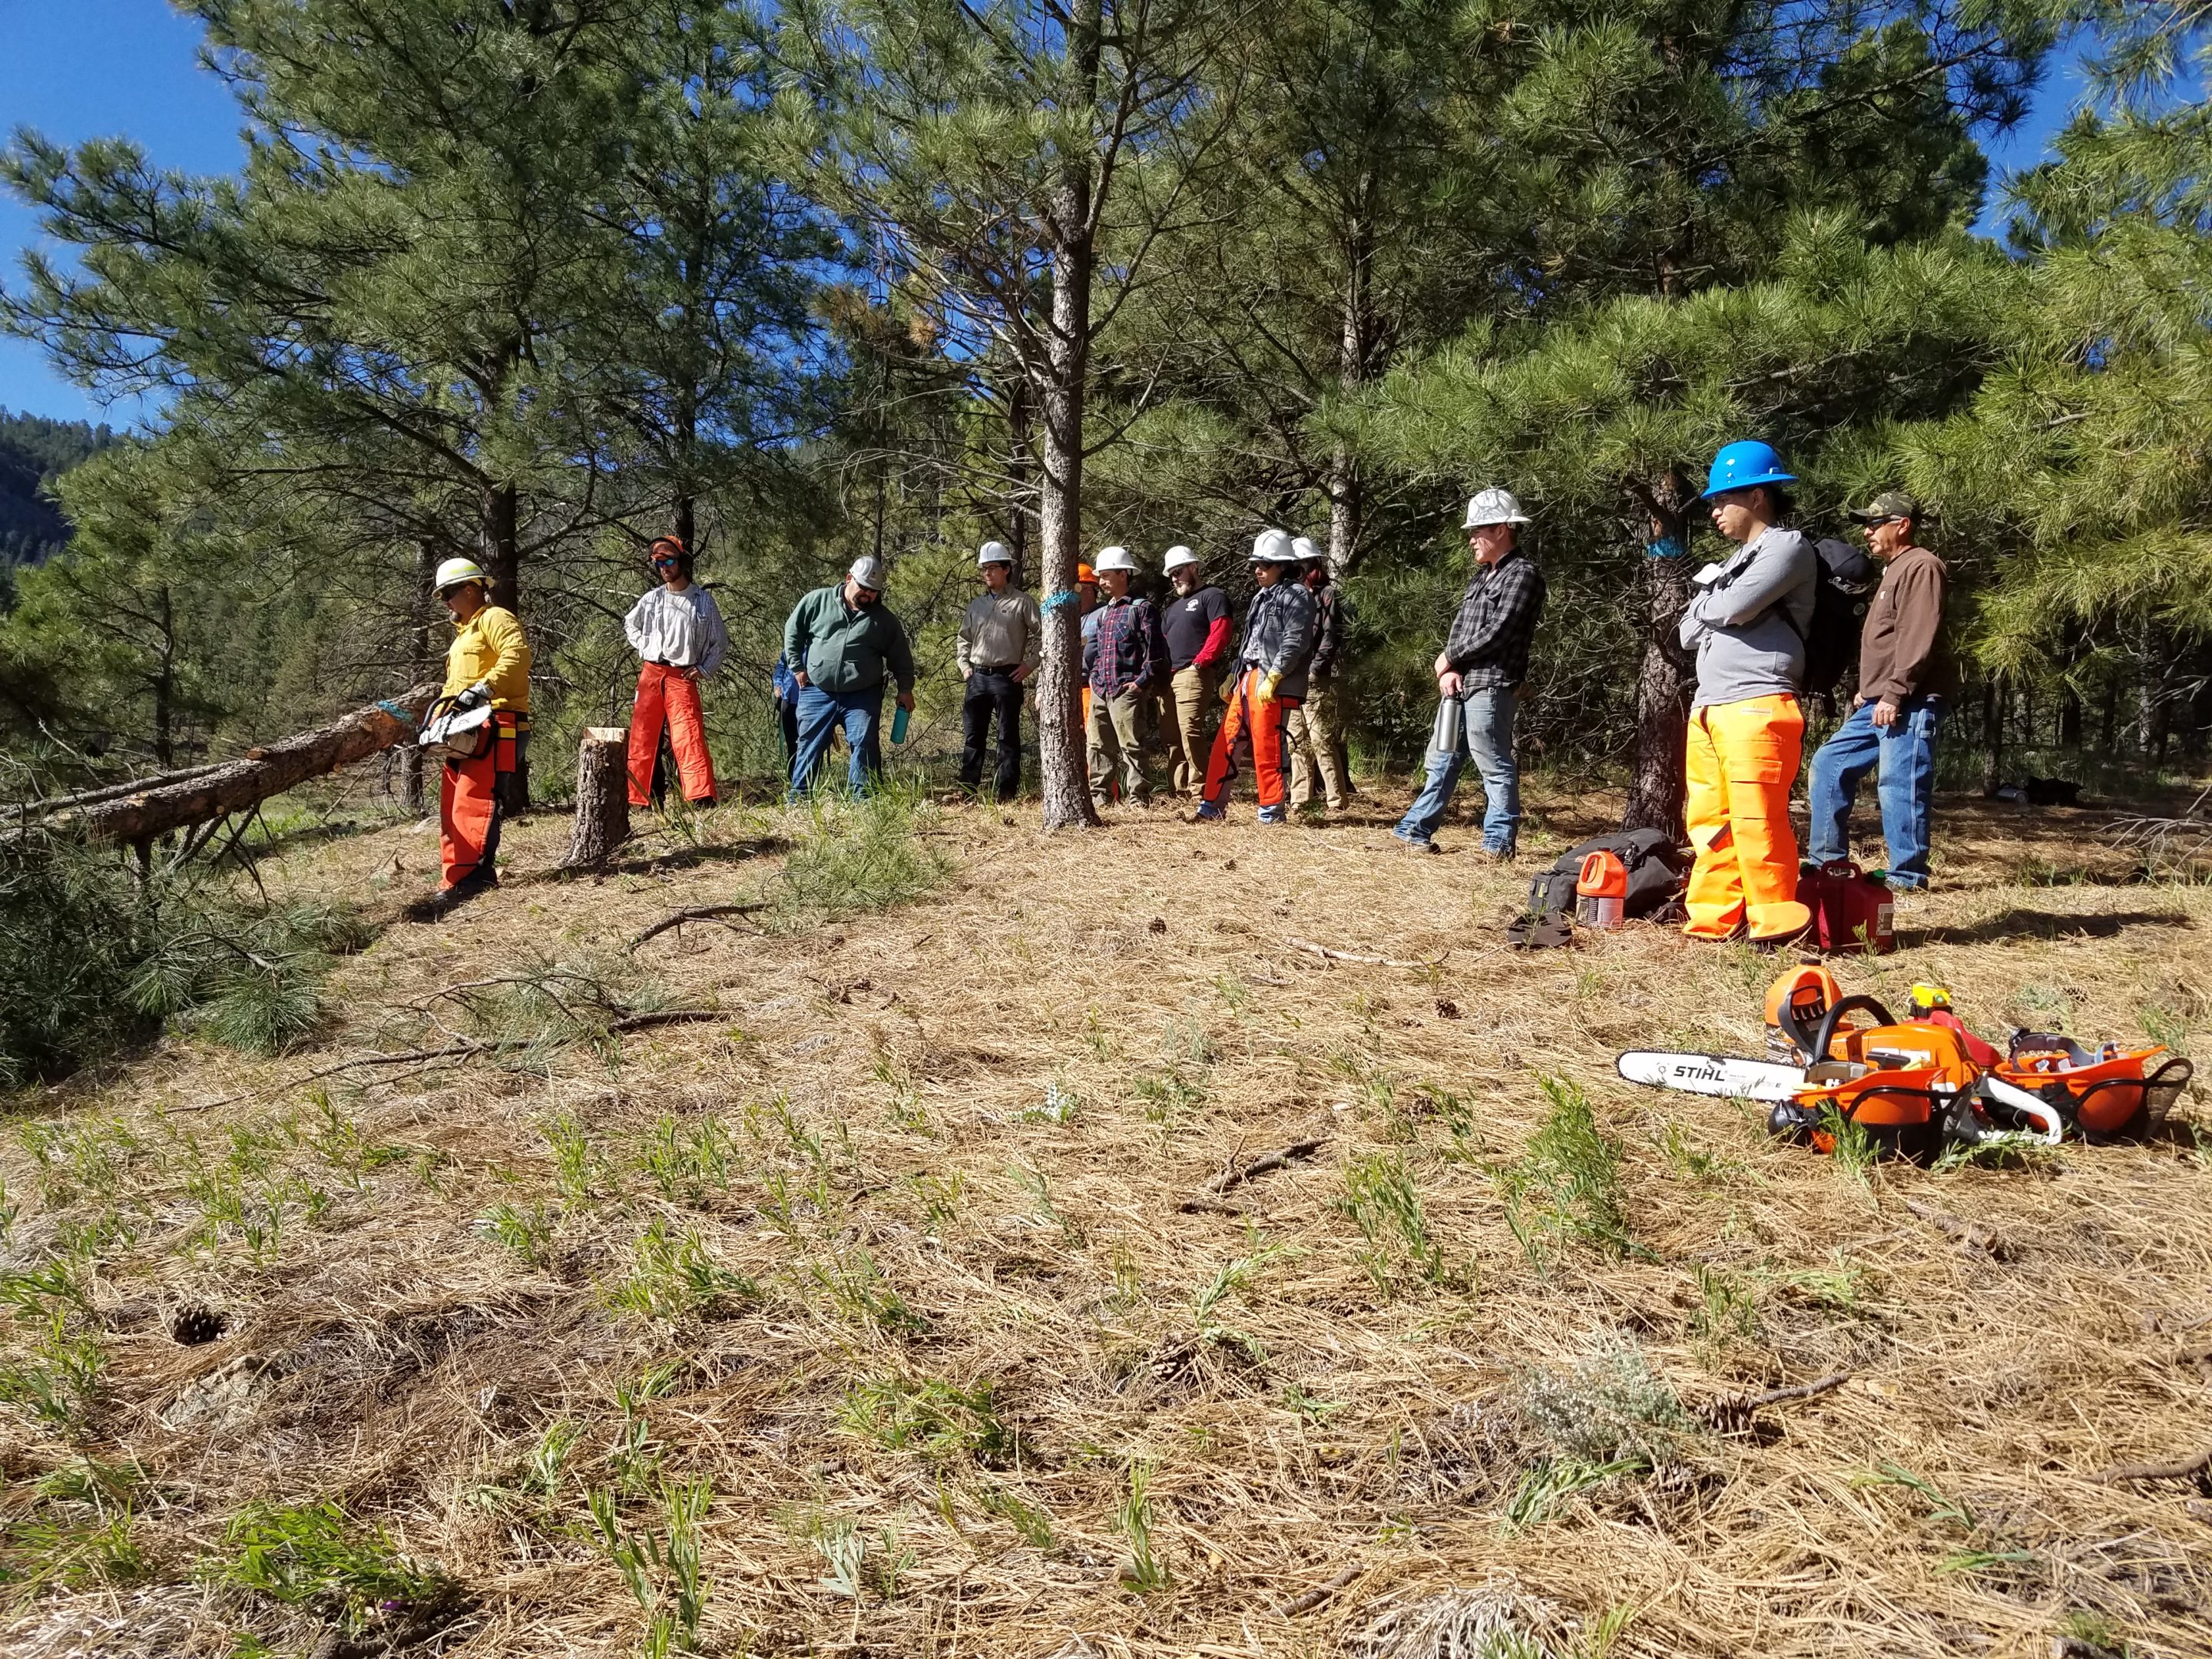 Forestry students gather in the field.